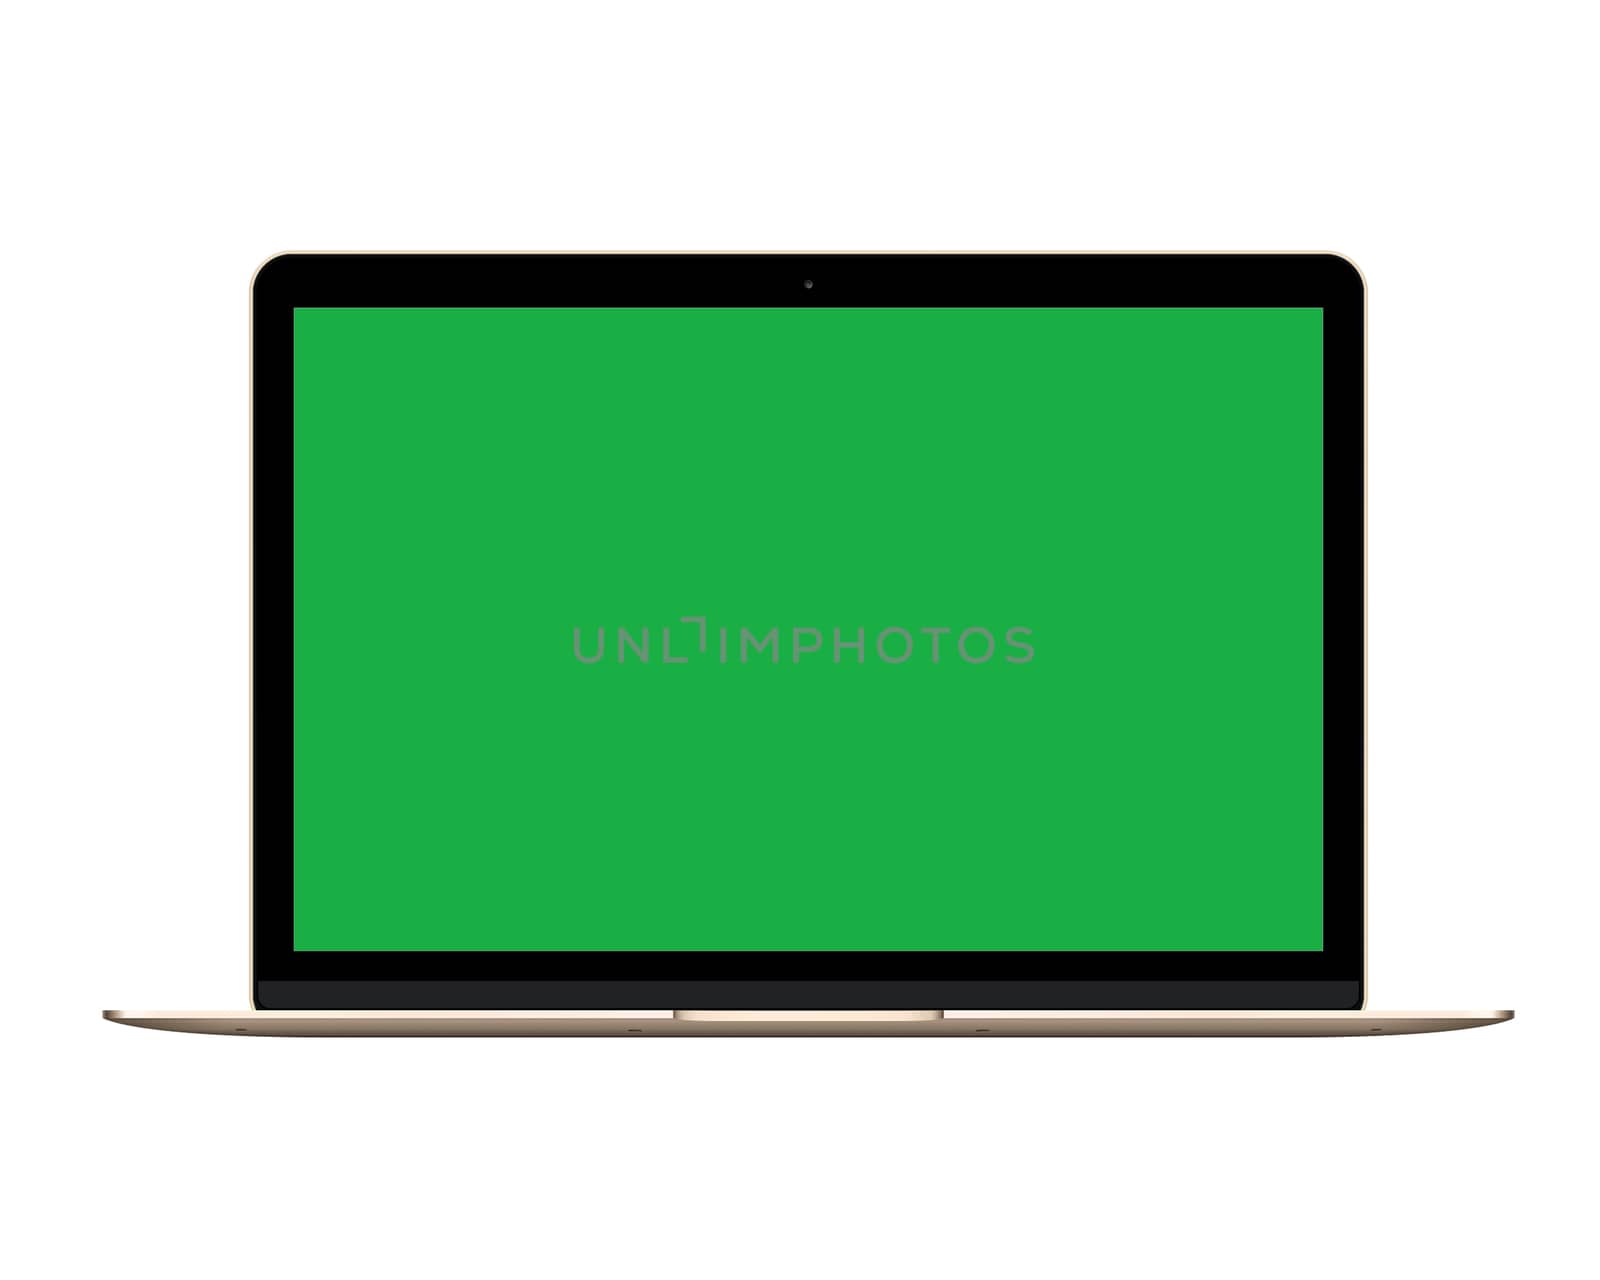 The isolated gold laptop computer mockup with green screen